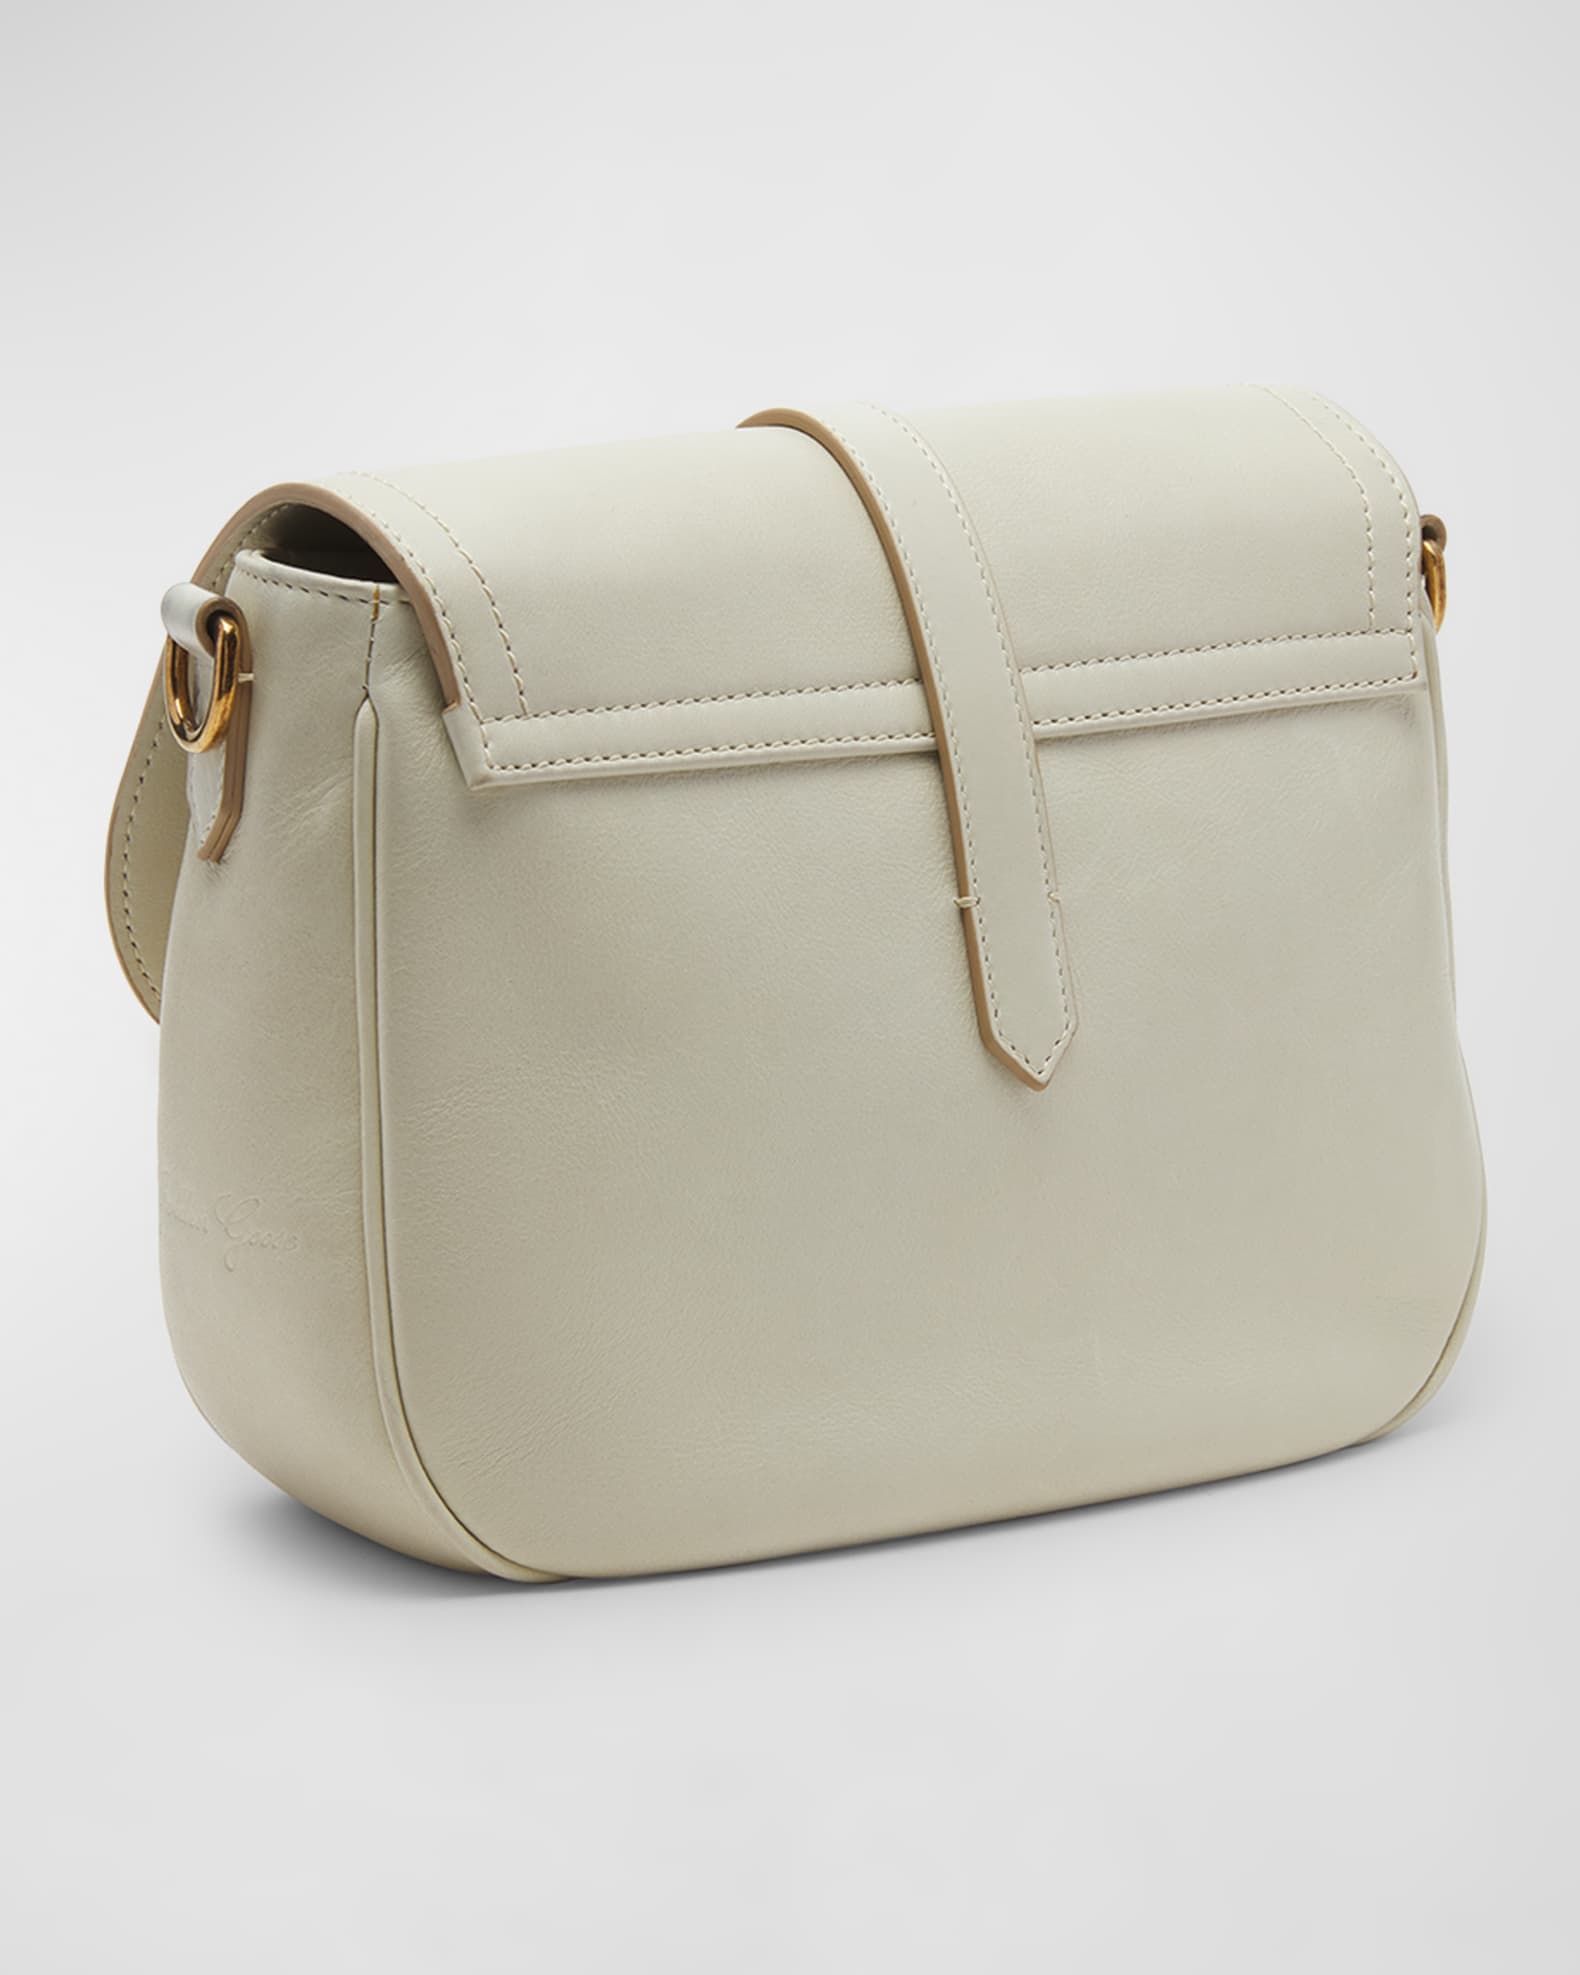 Medium Sally Bag in porcelain leather with buckle and contrasting